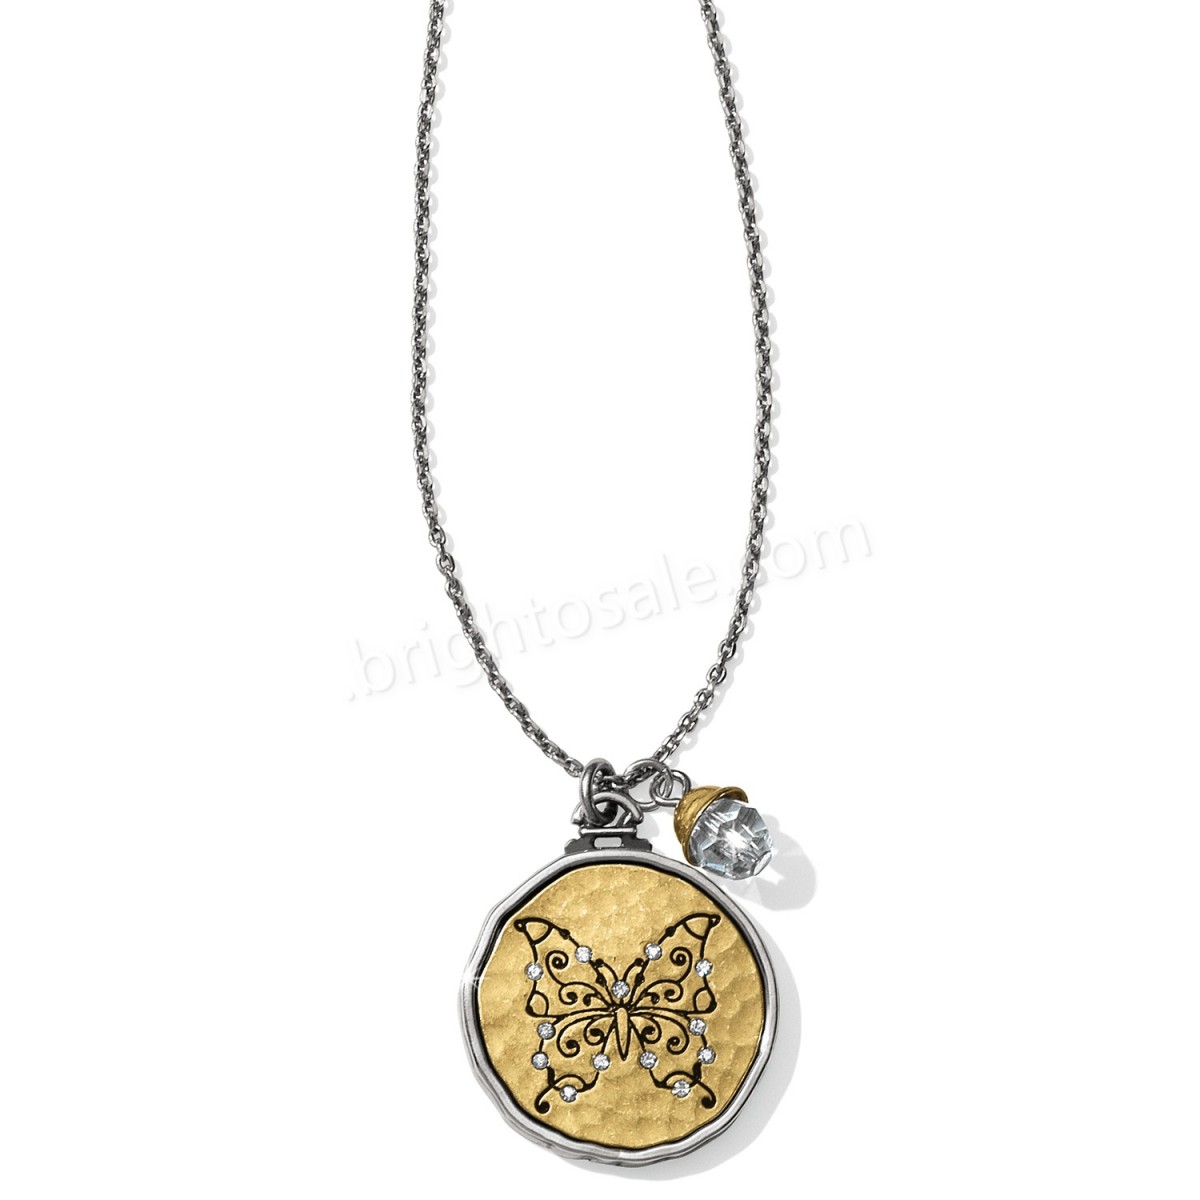 Brighton Collectibles & Online Discount Stars For The Soul Dreams Necklace - -0